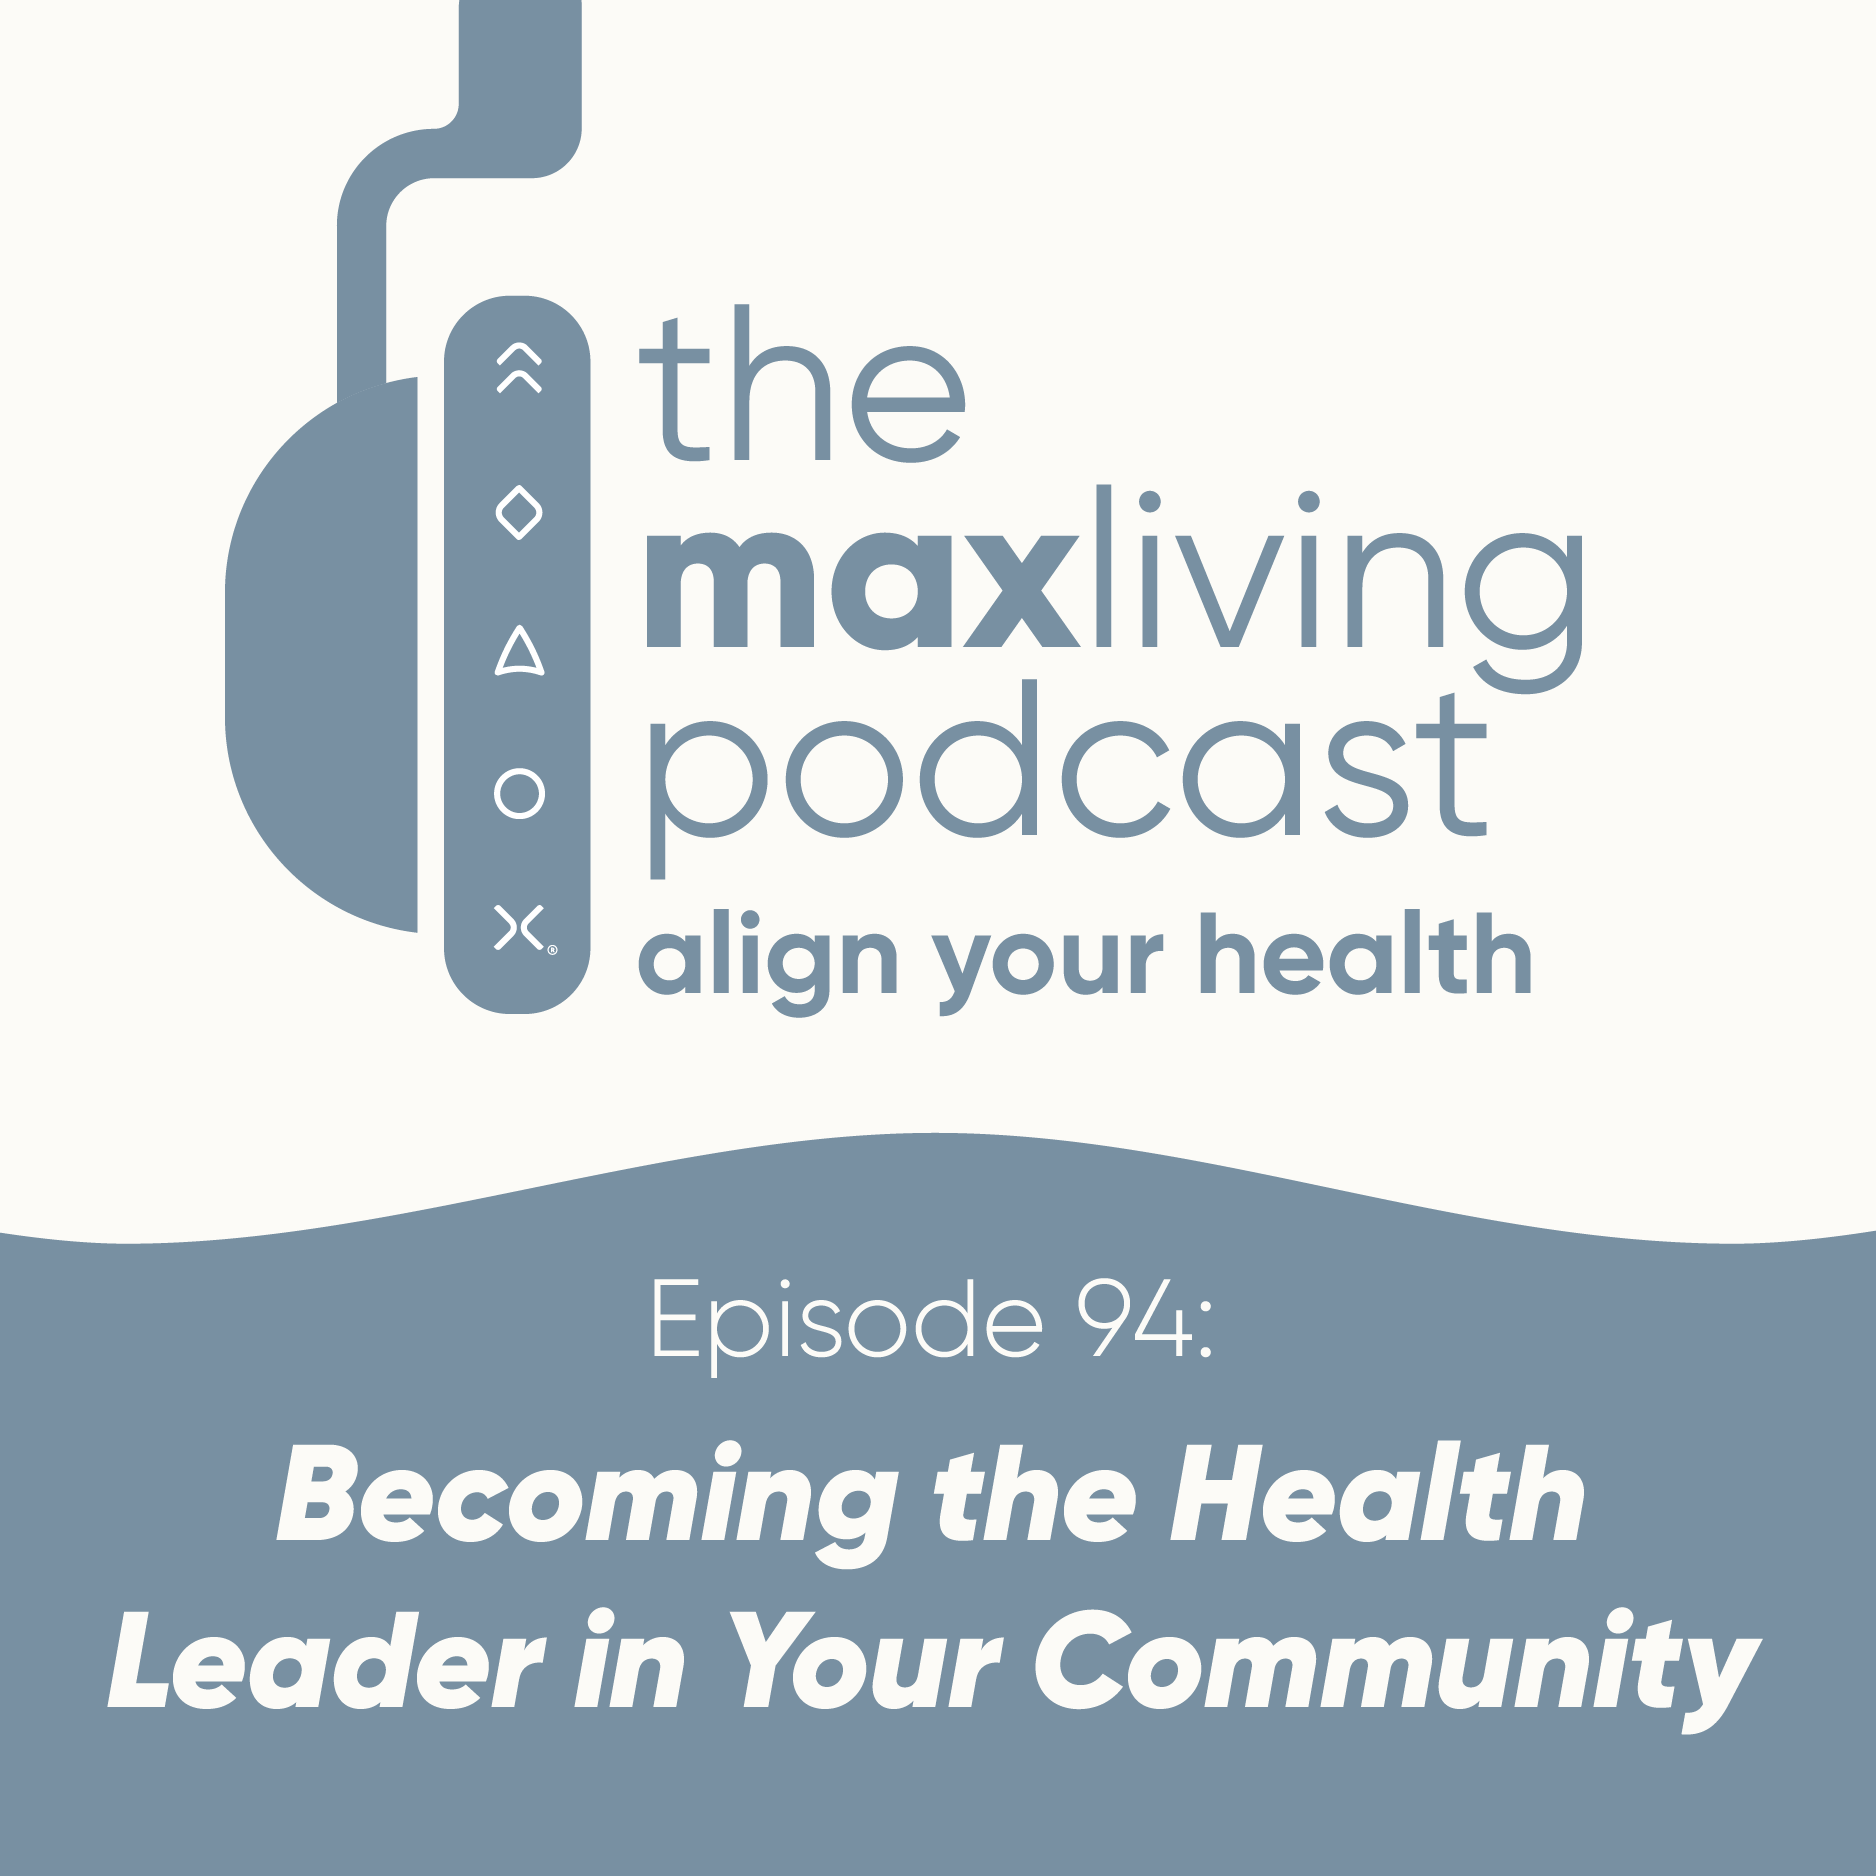 Becoming the Health Leader in Your Community